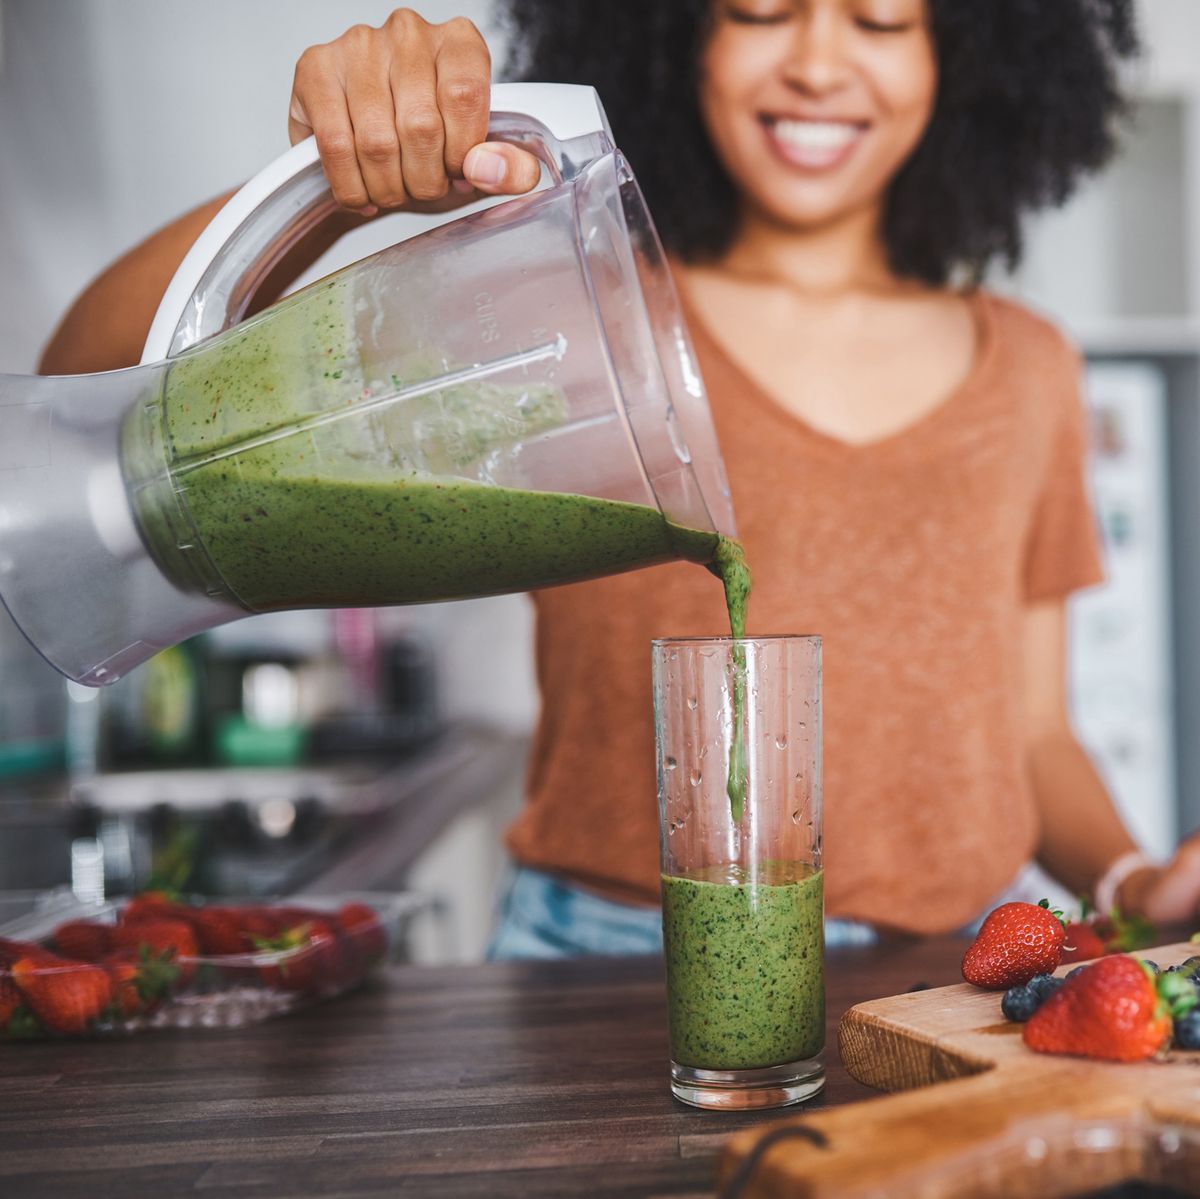 Is Juicing Good for Weight Loss? Here’s What Doctors Say